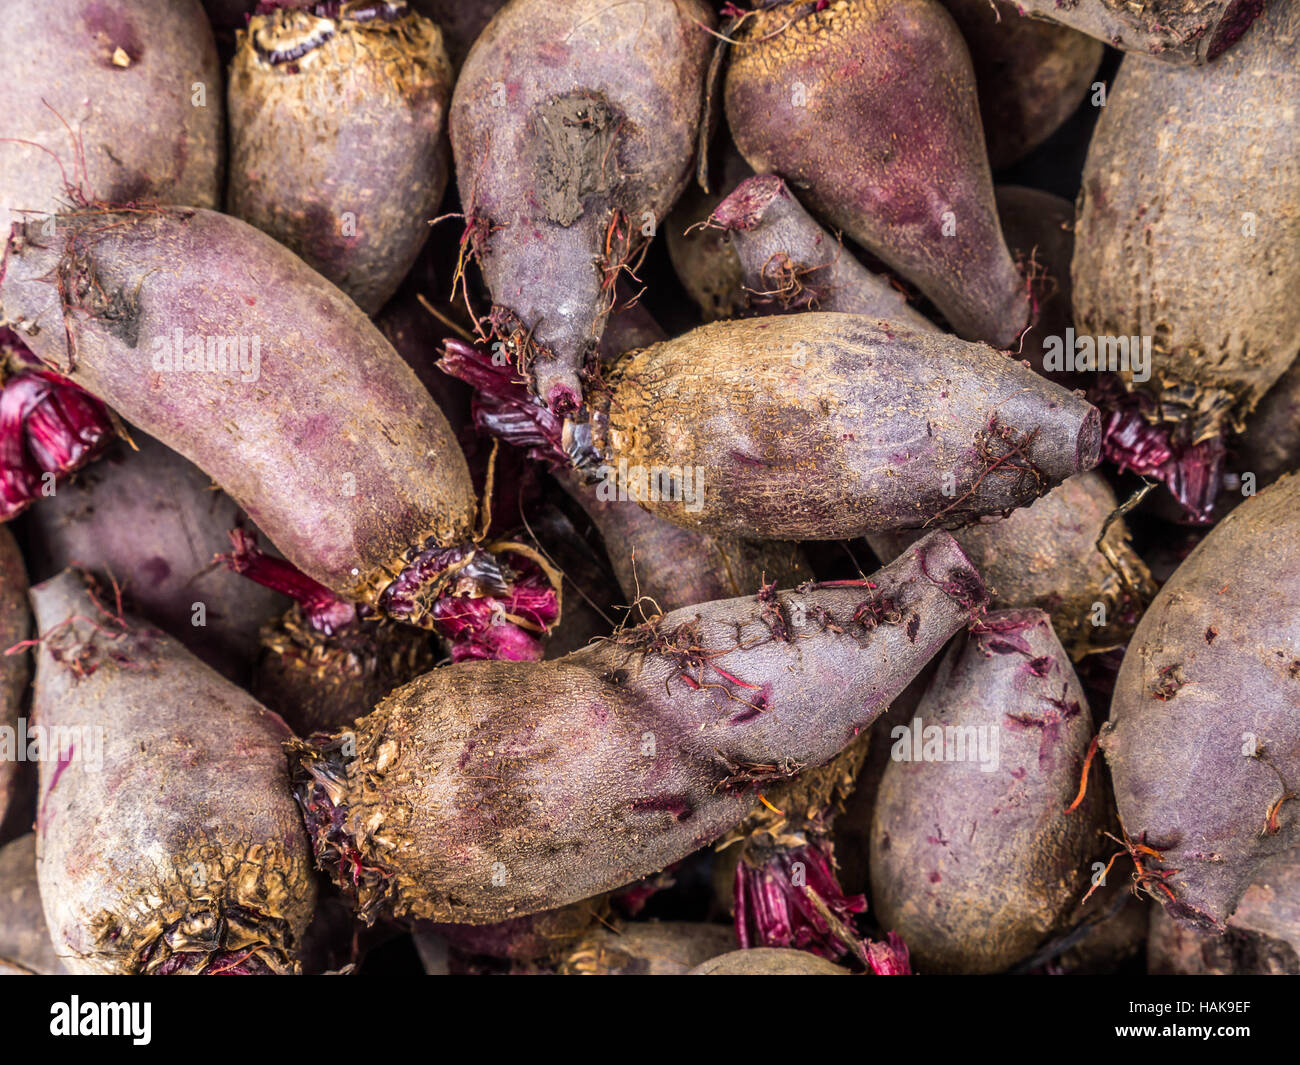 Bunch of fresh organic beetroots shot from above Stock Photo